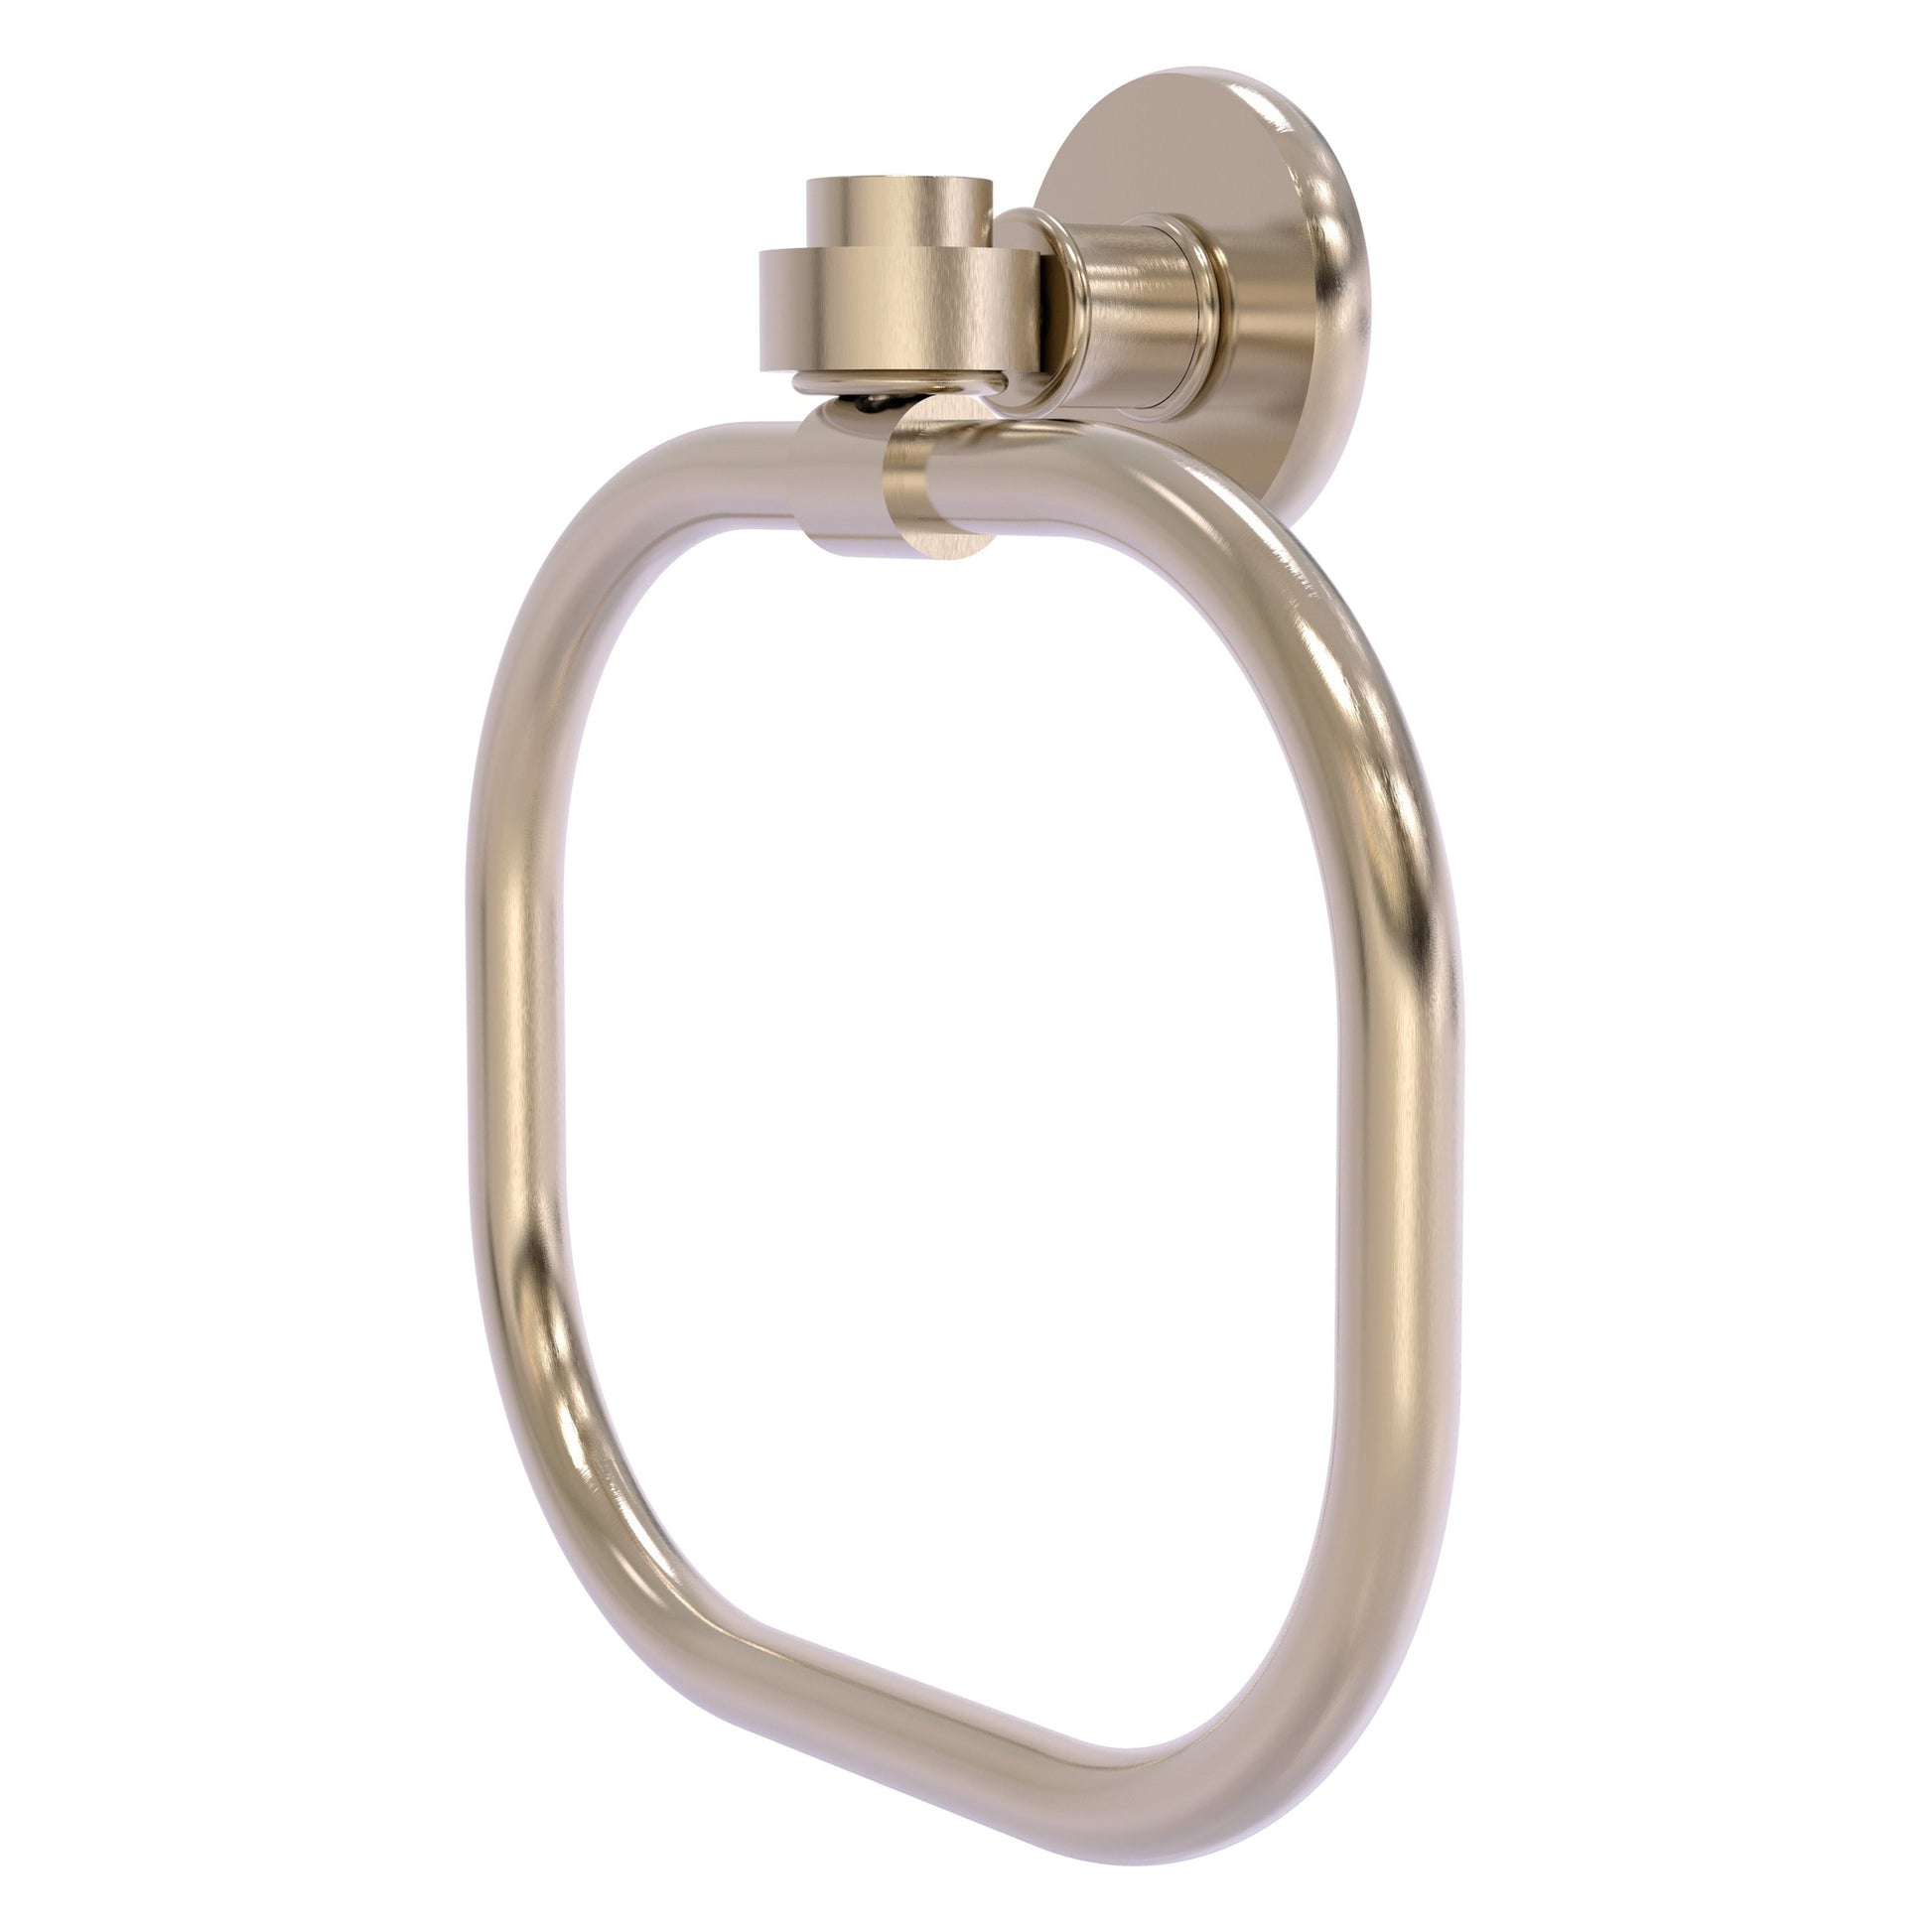 Allied Brass Skyline 2016 9" Antique Pewter Solid Brass Towel Ring